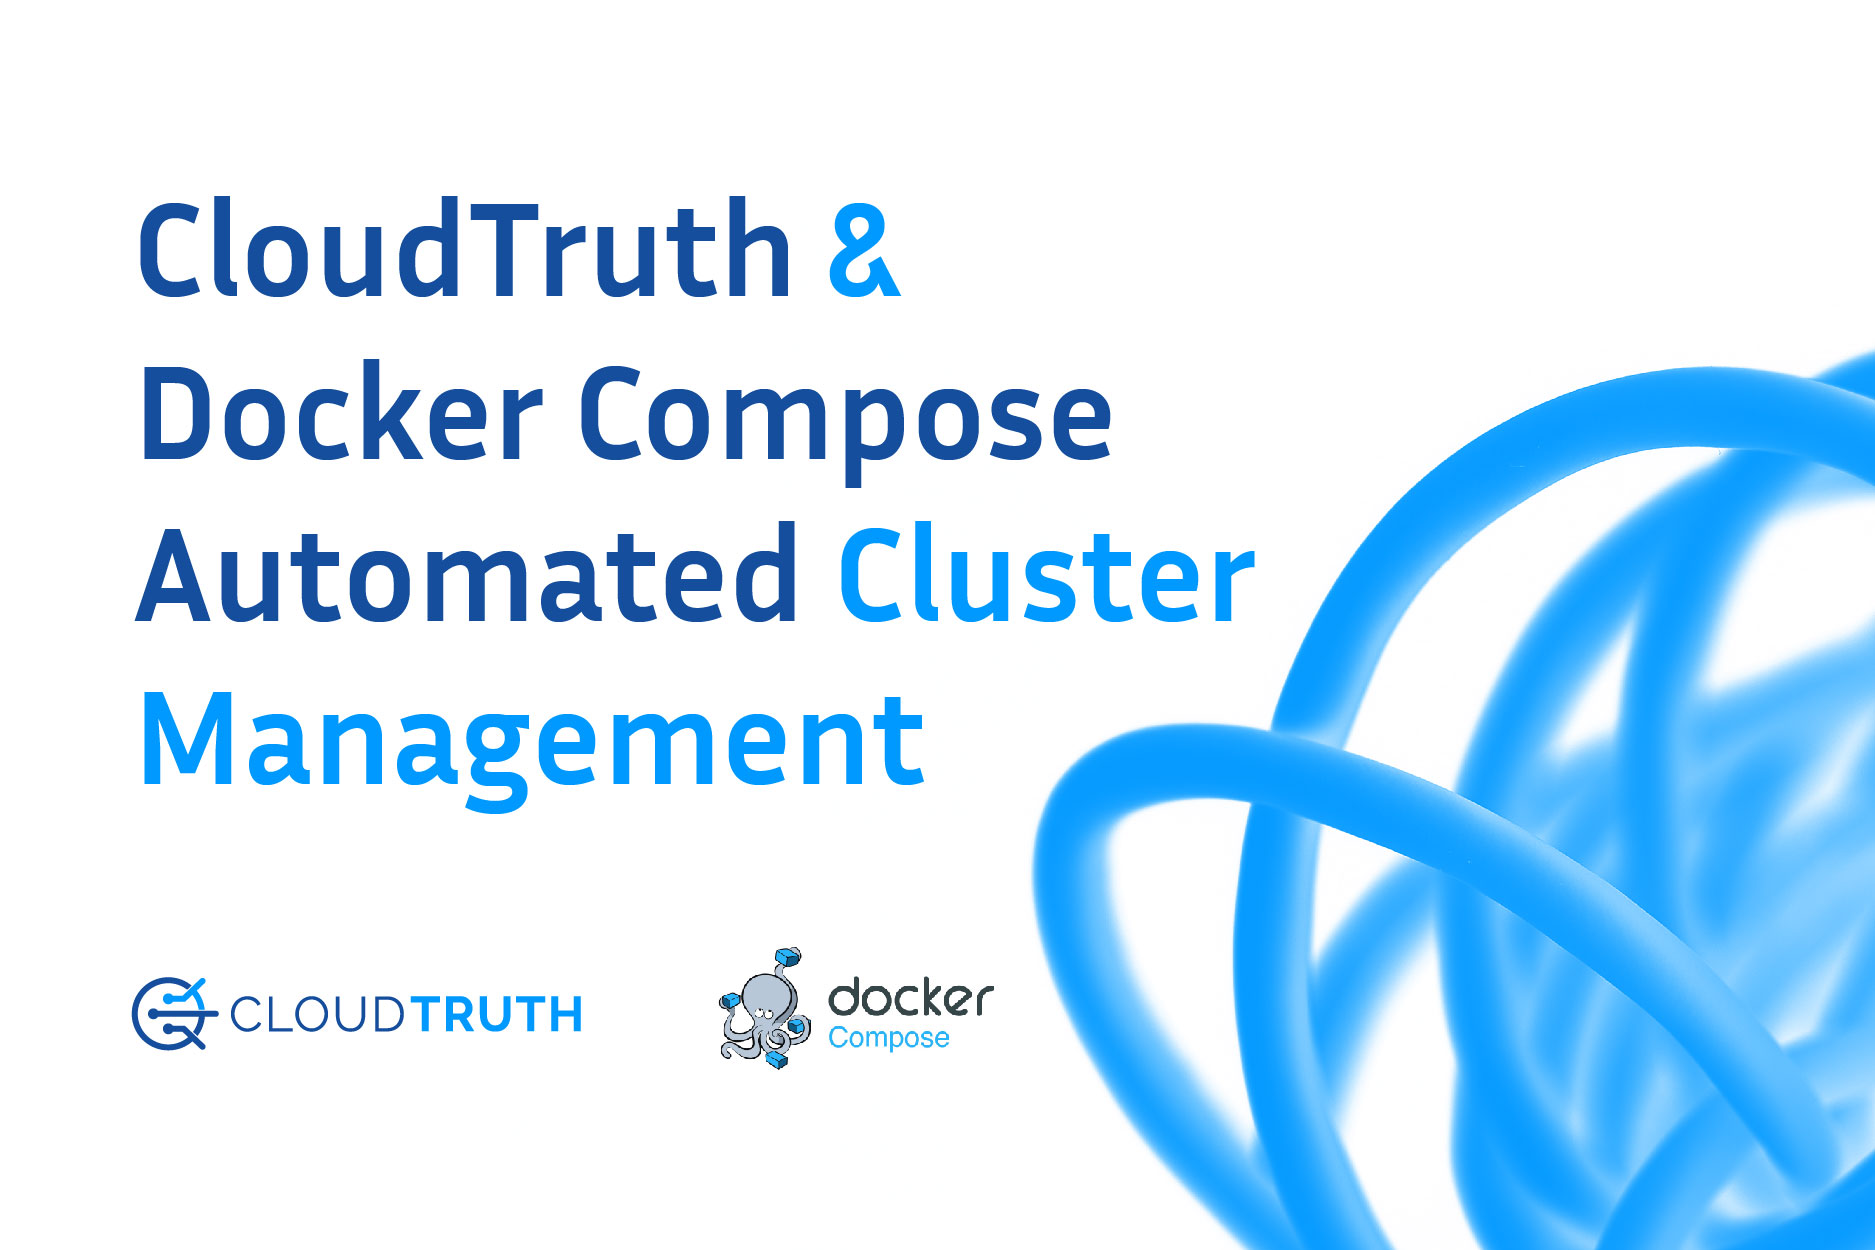 CloudTruth and Docker Compose